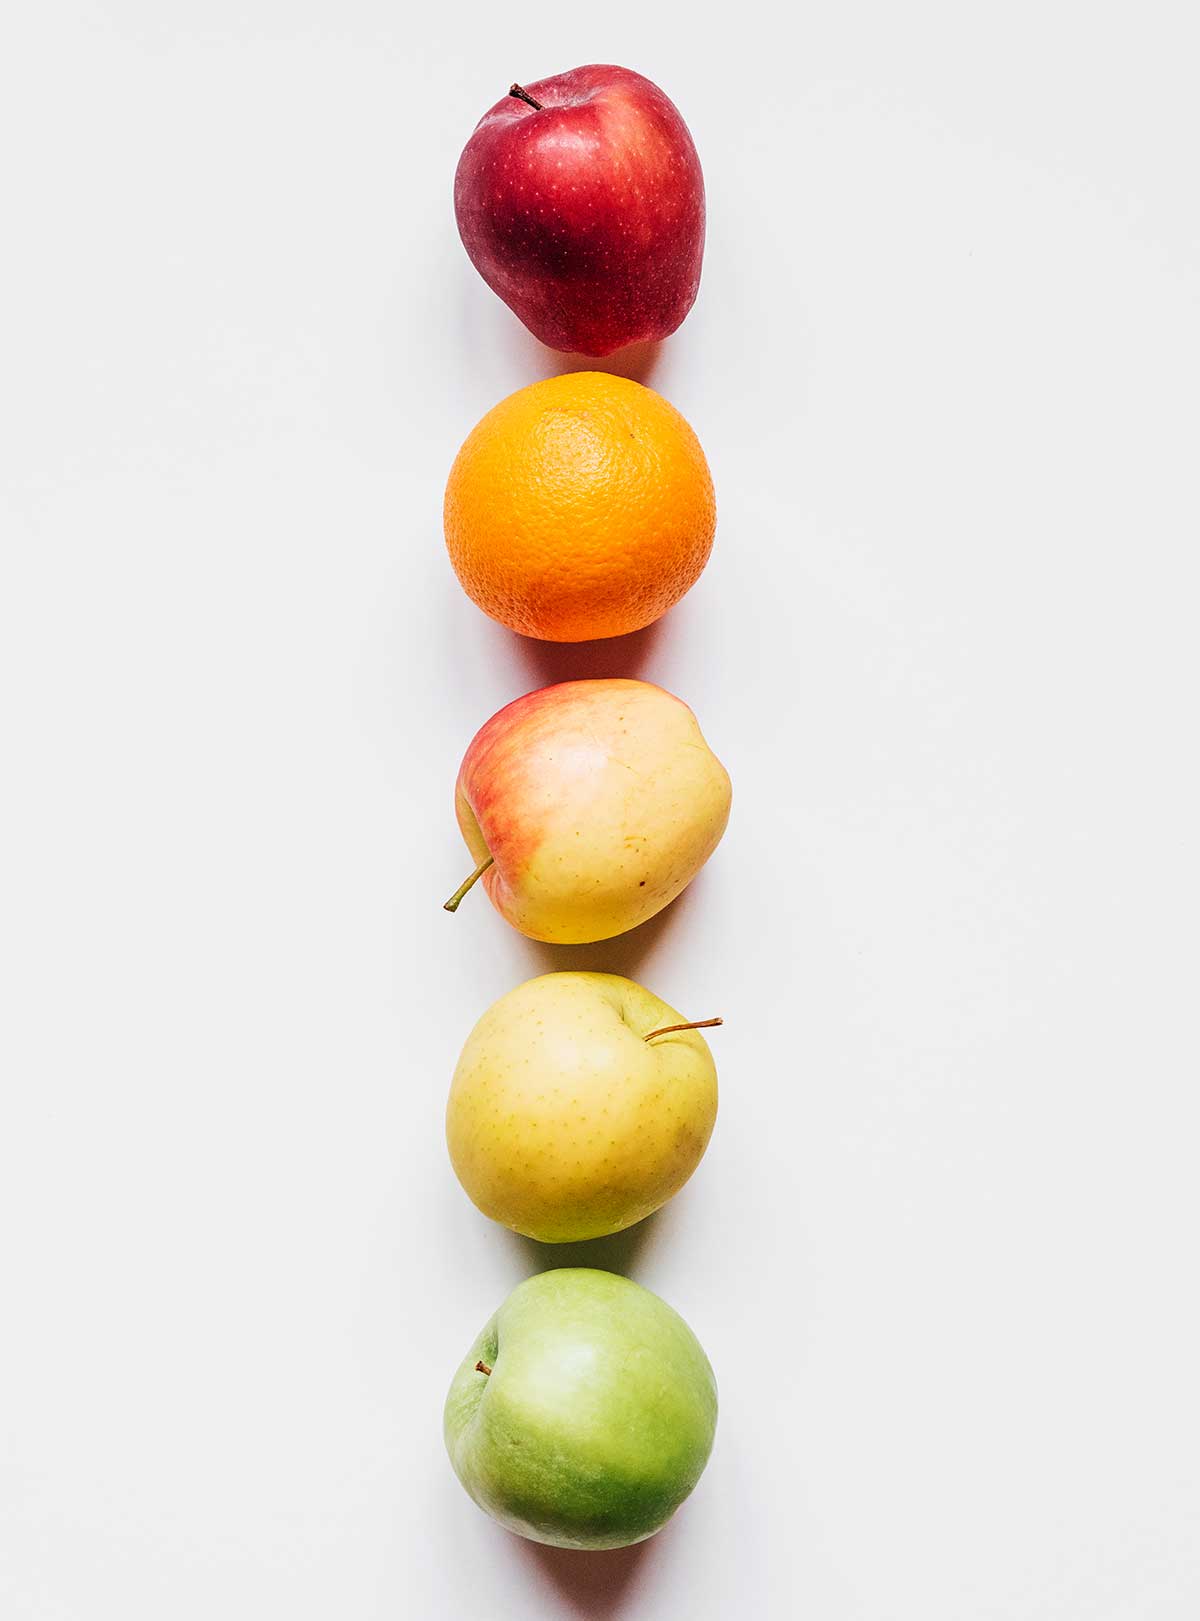 A rainbow of apples and an orange laid out in a vertical line from red to green